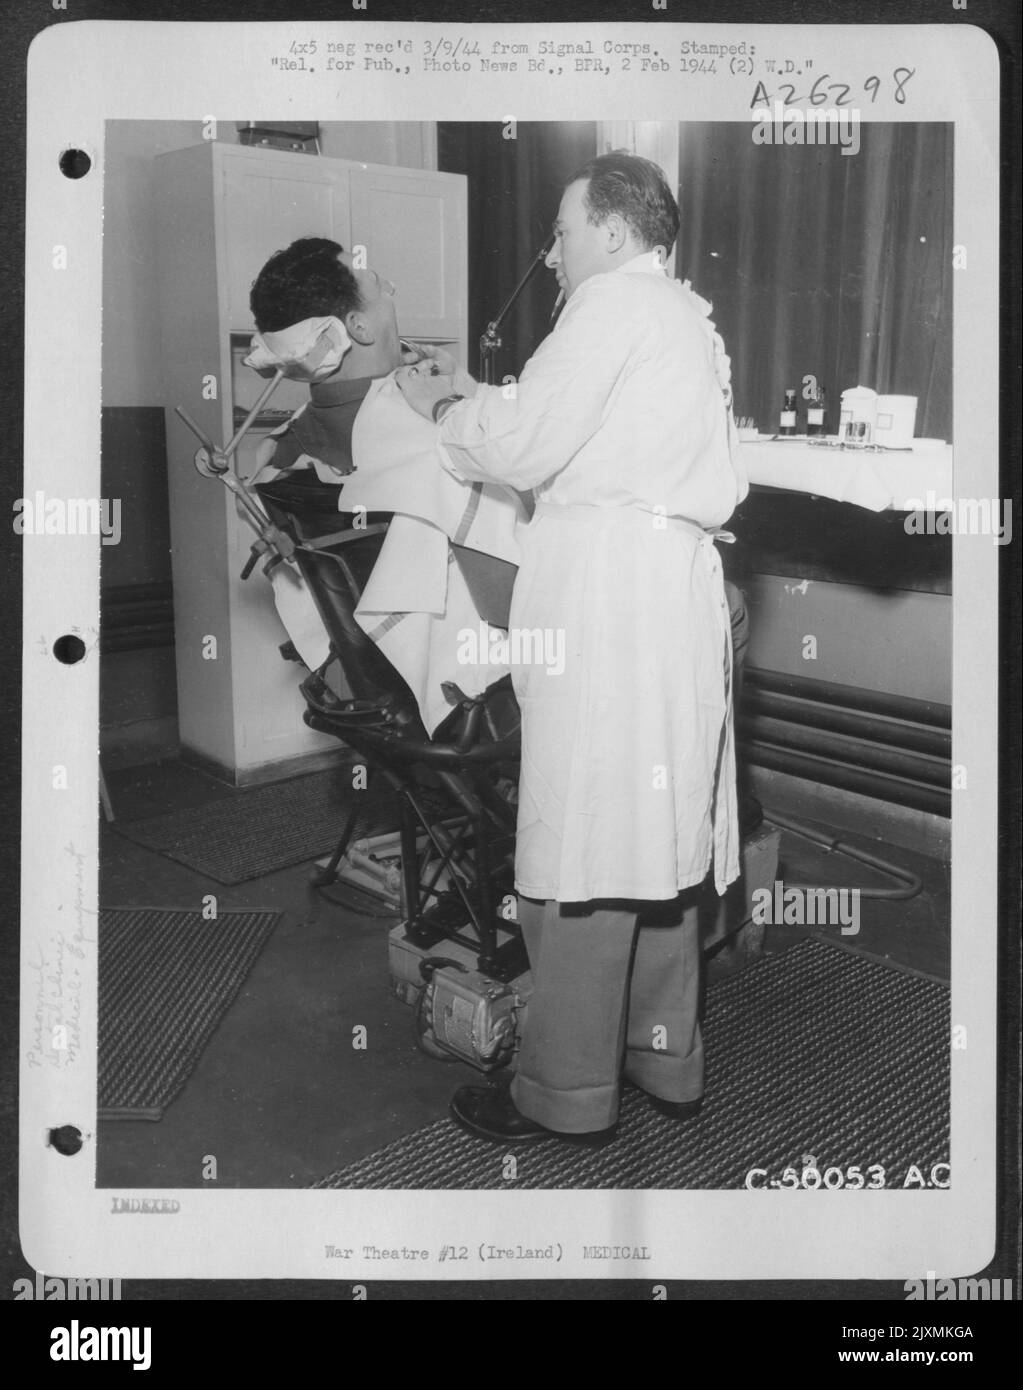 1st Lt. Herman Ivanhoe, Brooklyn, N.Y., dental surgeon, dental surgeon, with the aid of Pvt. Anthony Perri, New Haven, Conn., dental technician, shows the maneuverability of dental chair made from a pilot's seat by Lt. Ivanhoe. Stock Photo